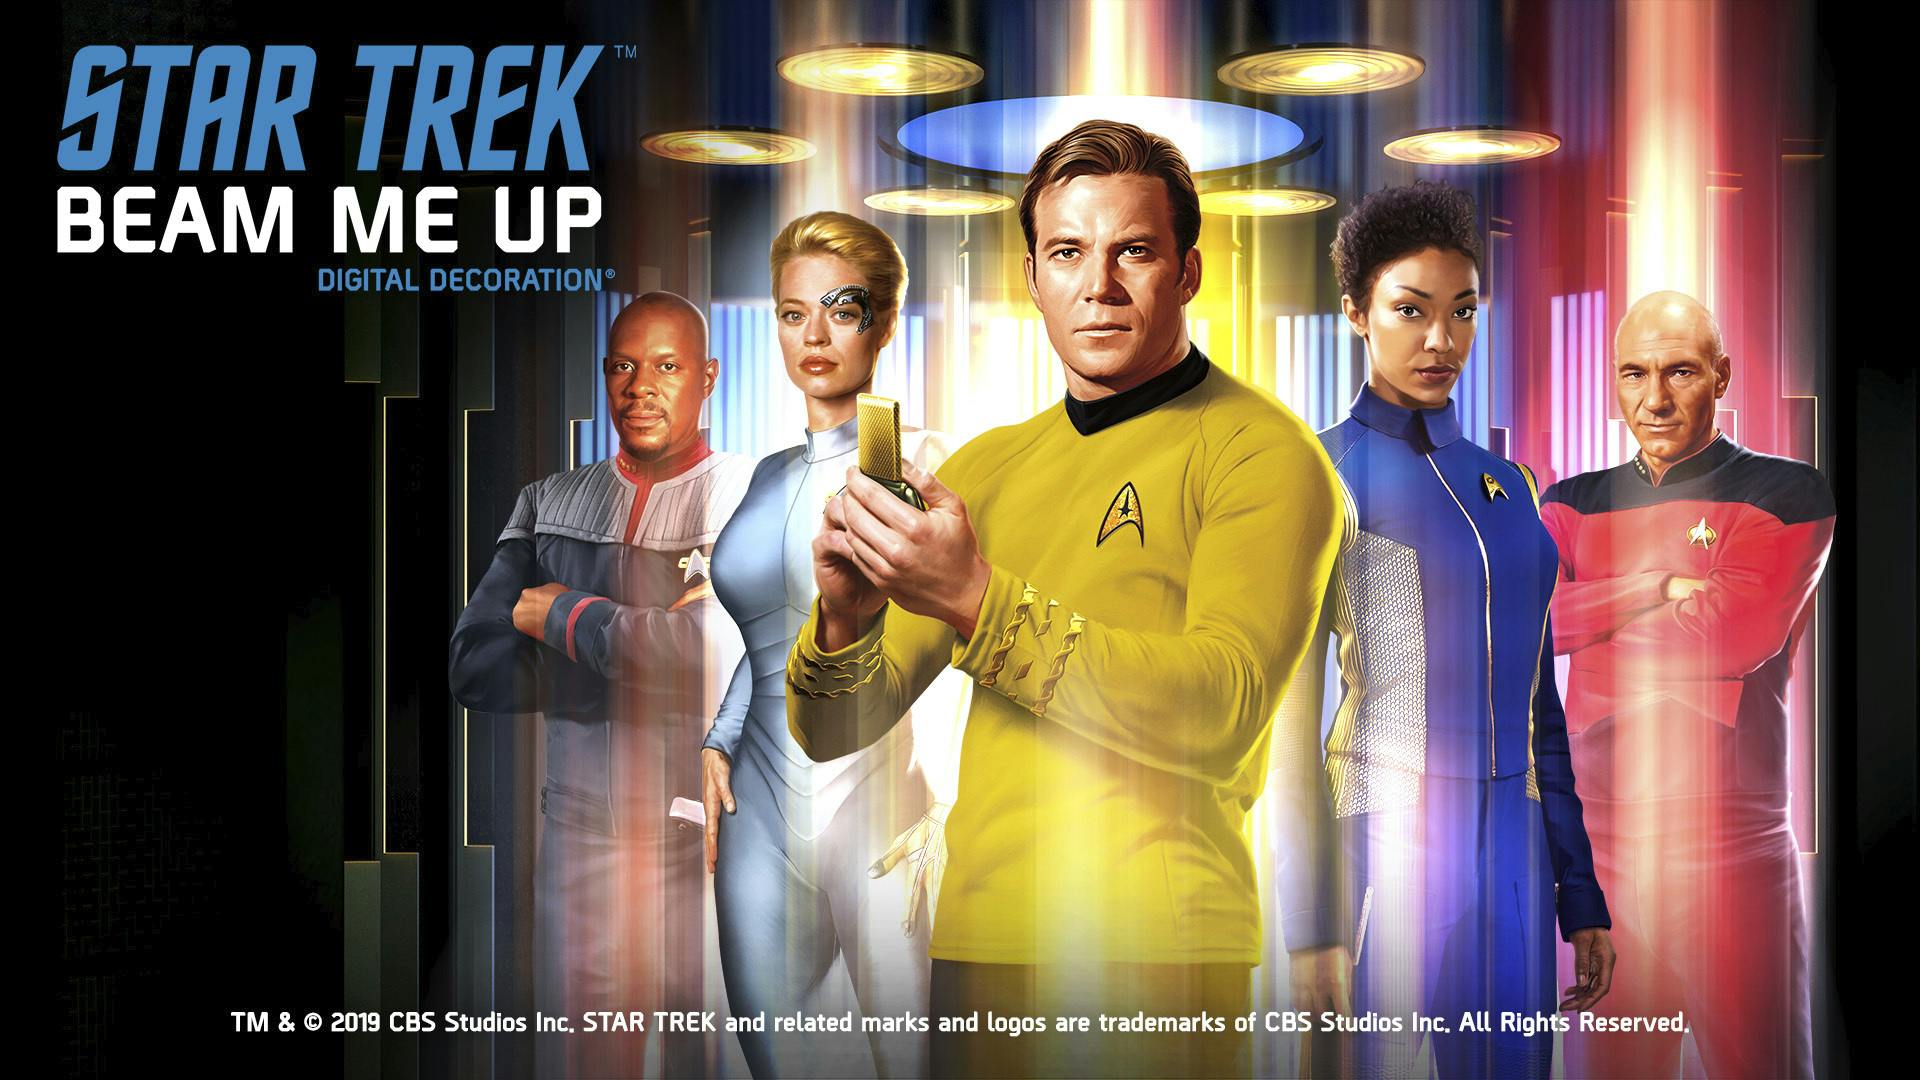 Kirk, Spock, and More to Beam Into a Living Room Near You | Star Trek